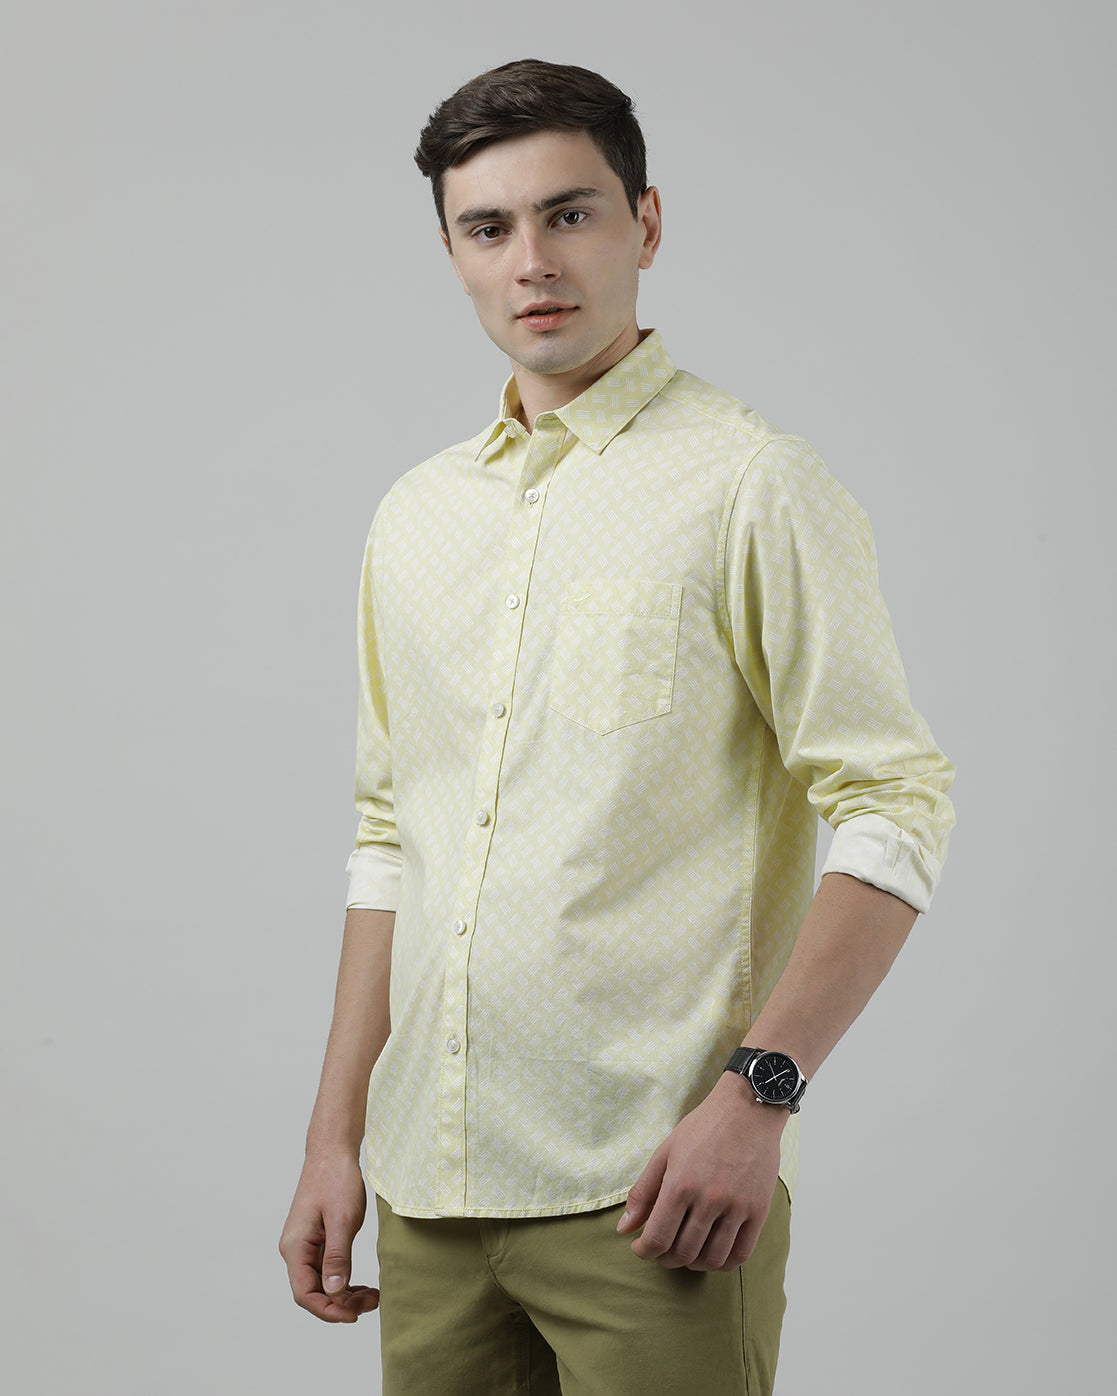 Casual Full Sleeve Comfort Fit Printed Shirt Yellow with Collar for Men